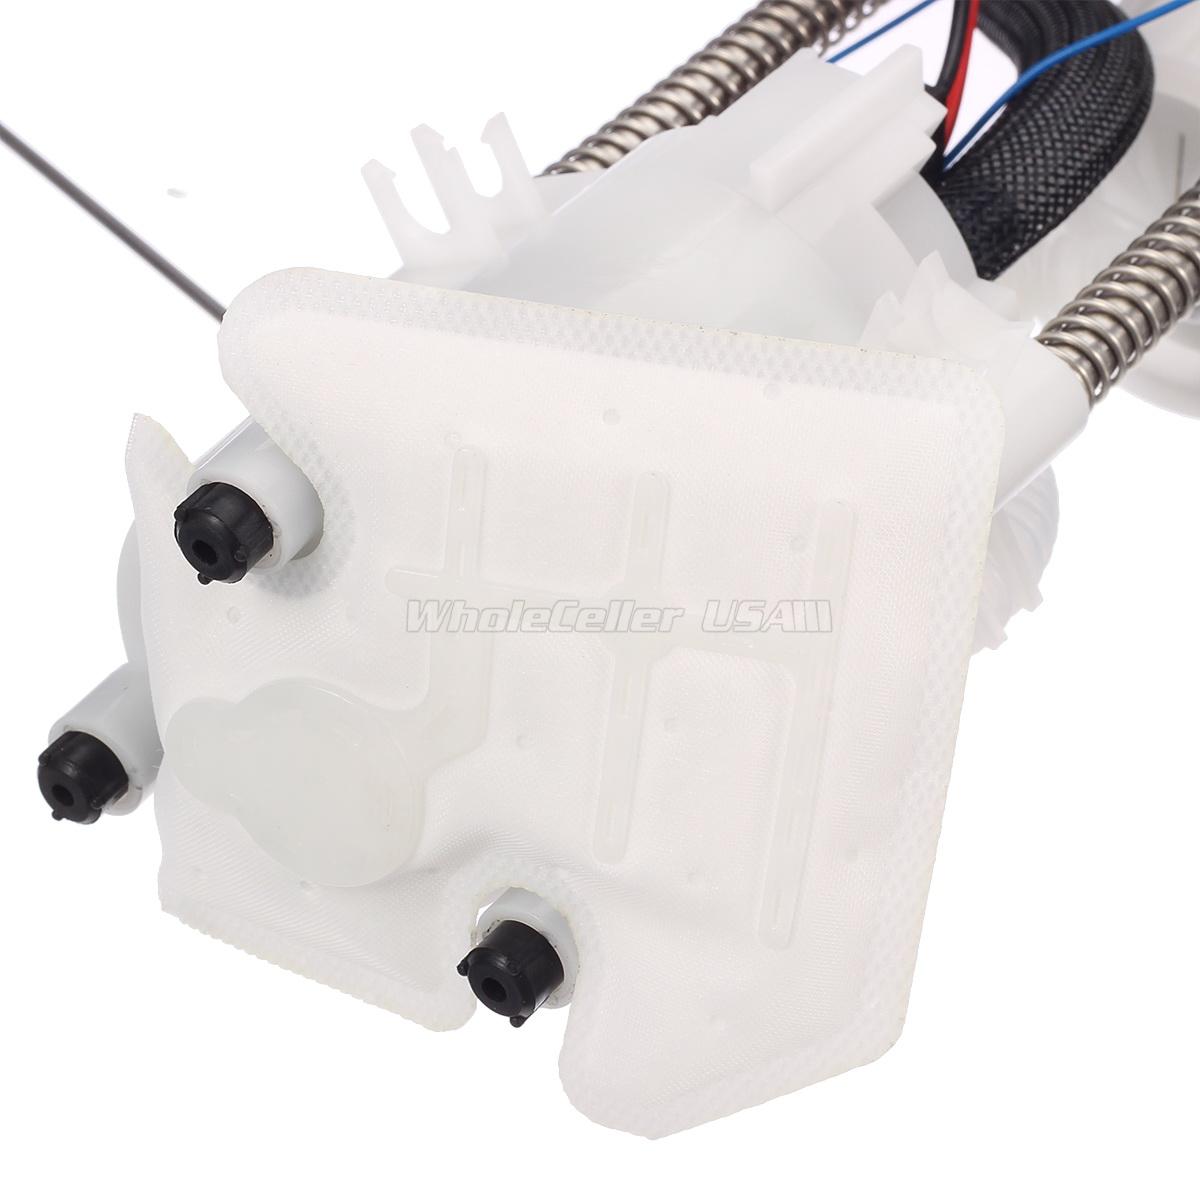 cost to replace 2005 expedition fuel pump driver module